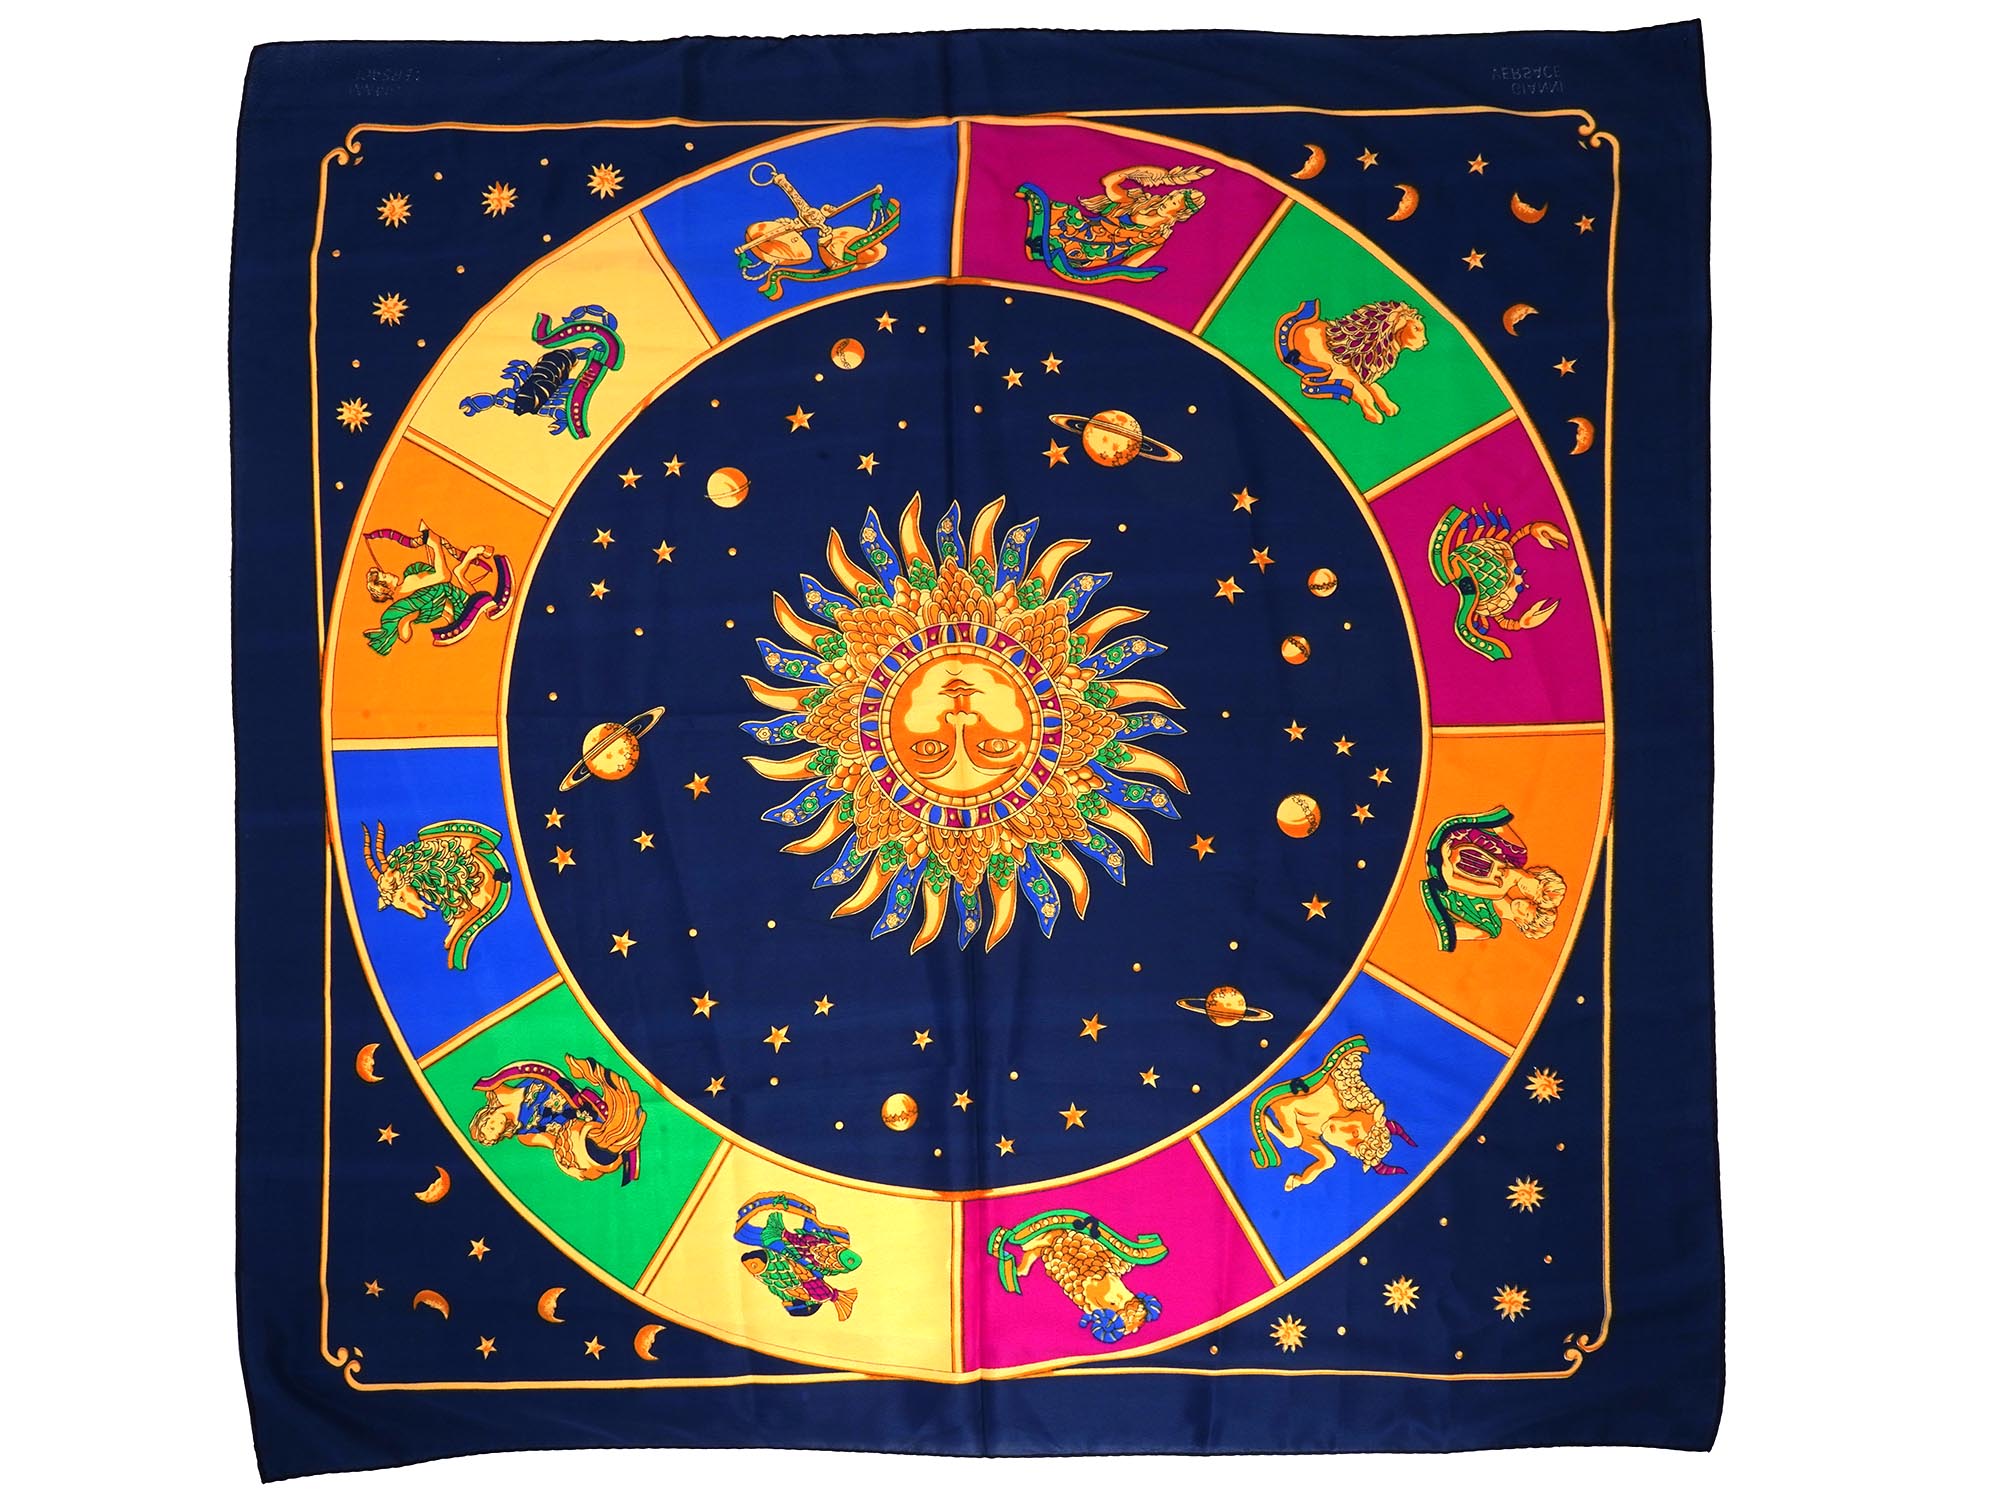 VINTAGE FRENCH VERSACE SPECIAL EDITION SILK SCARVES PIC-4